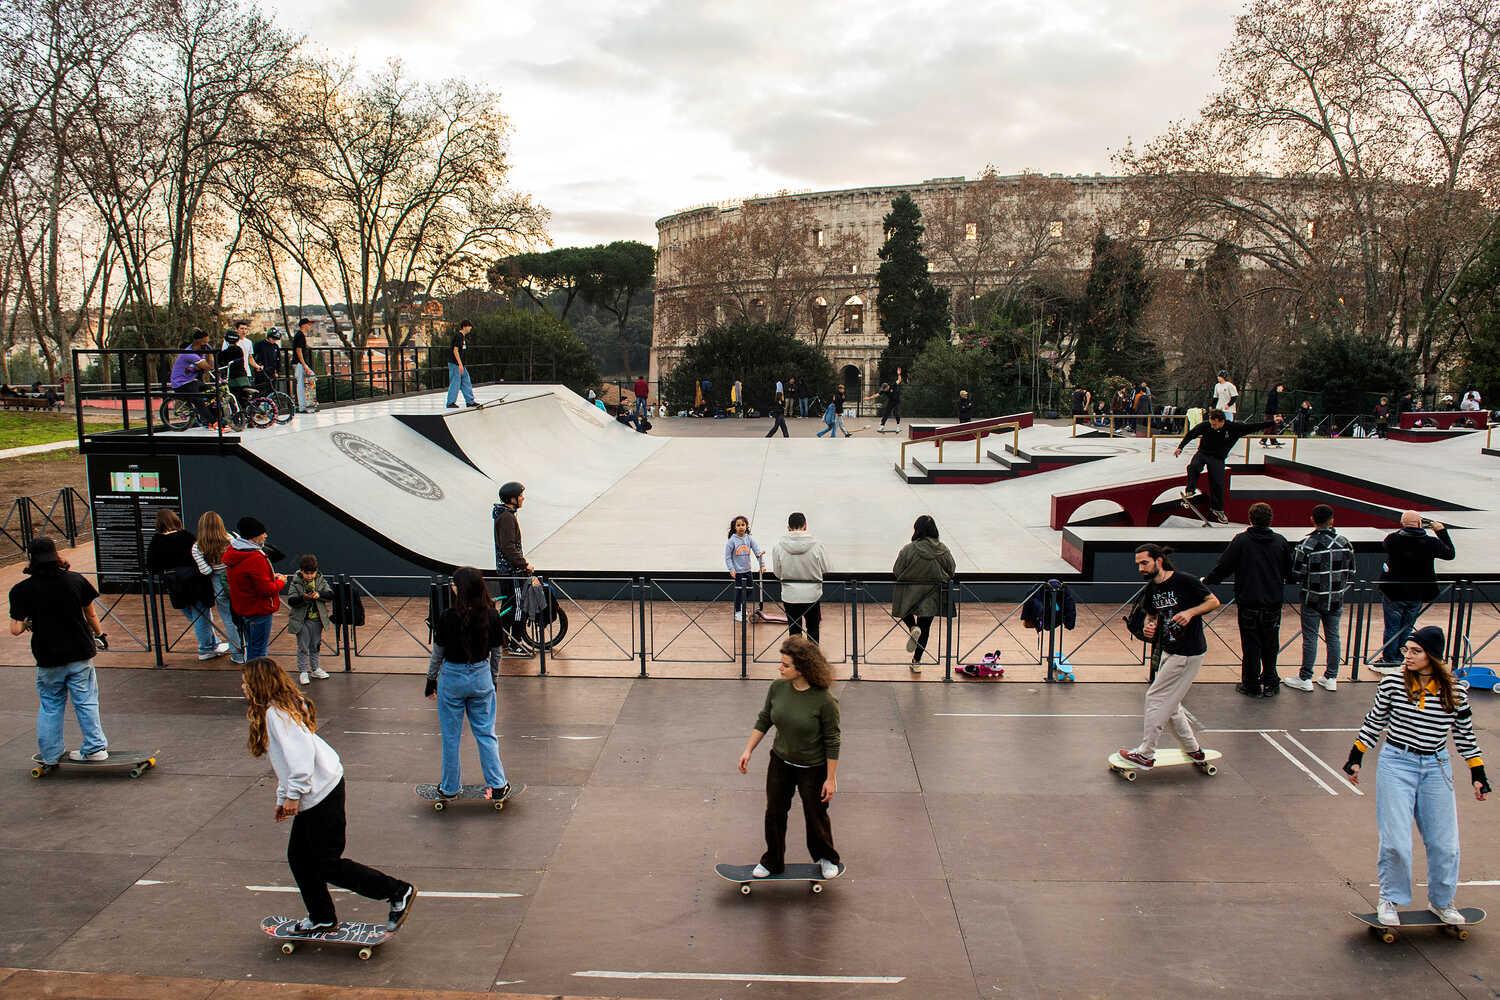 Rome city officials praise the new skatepark near the Colosseum as the skatepark with the best view in the world.